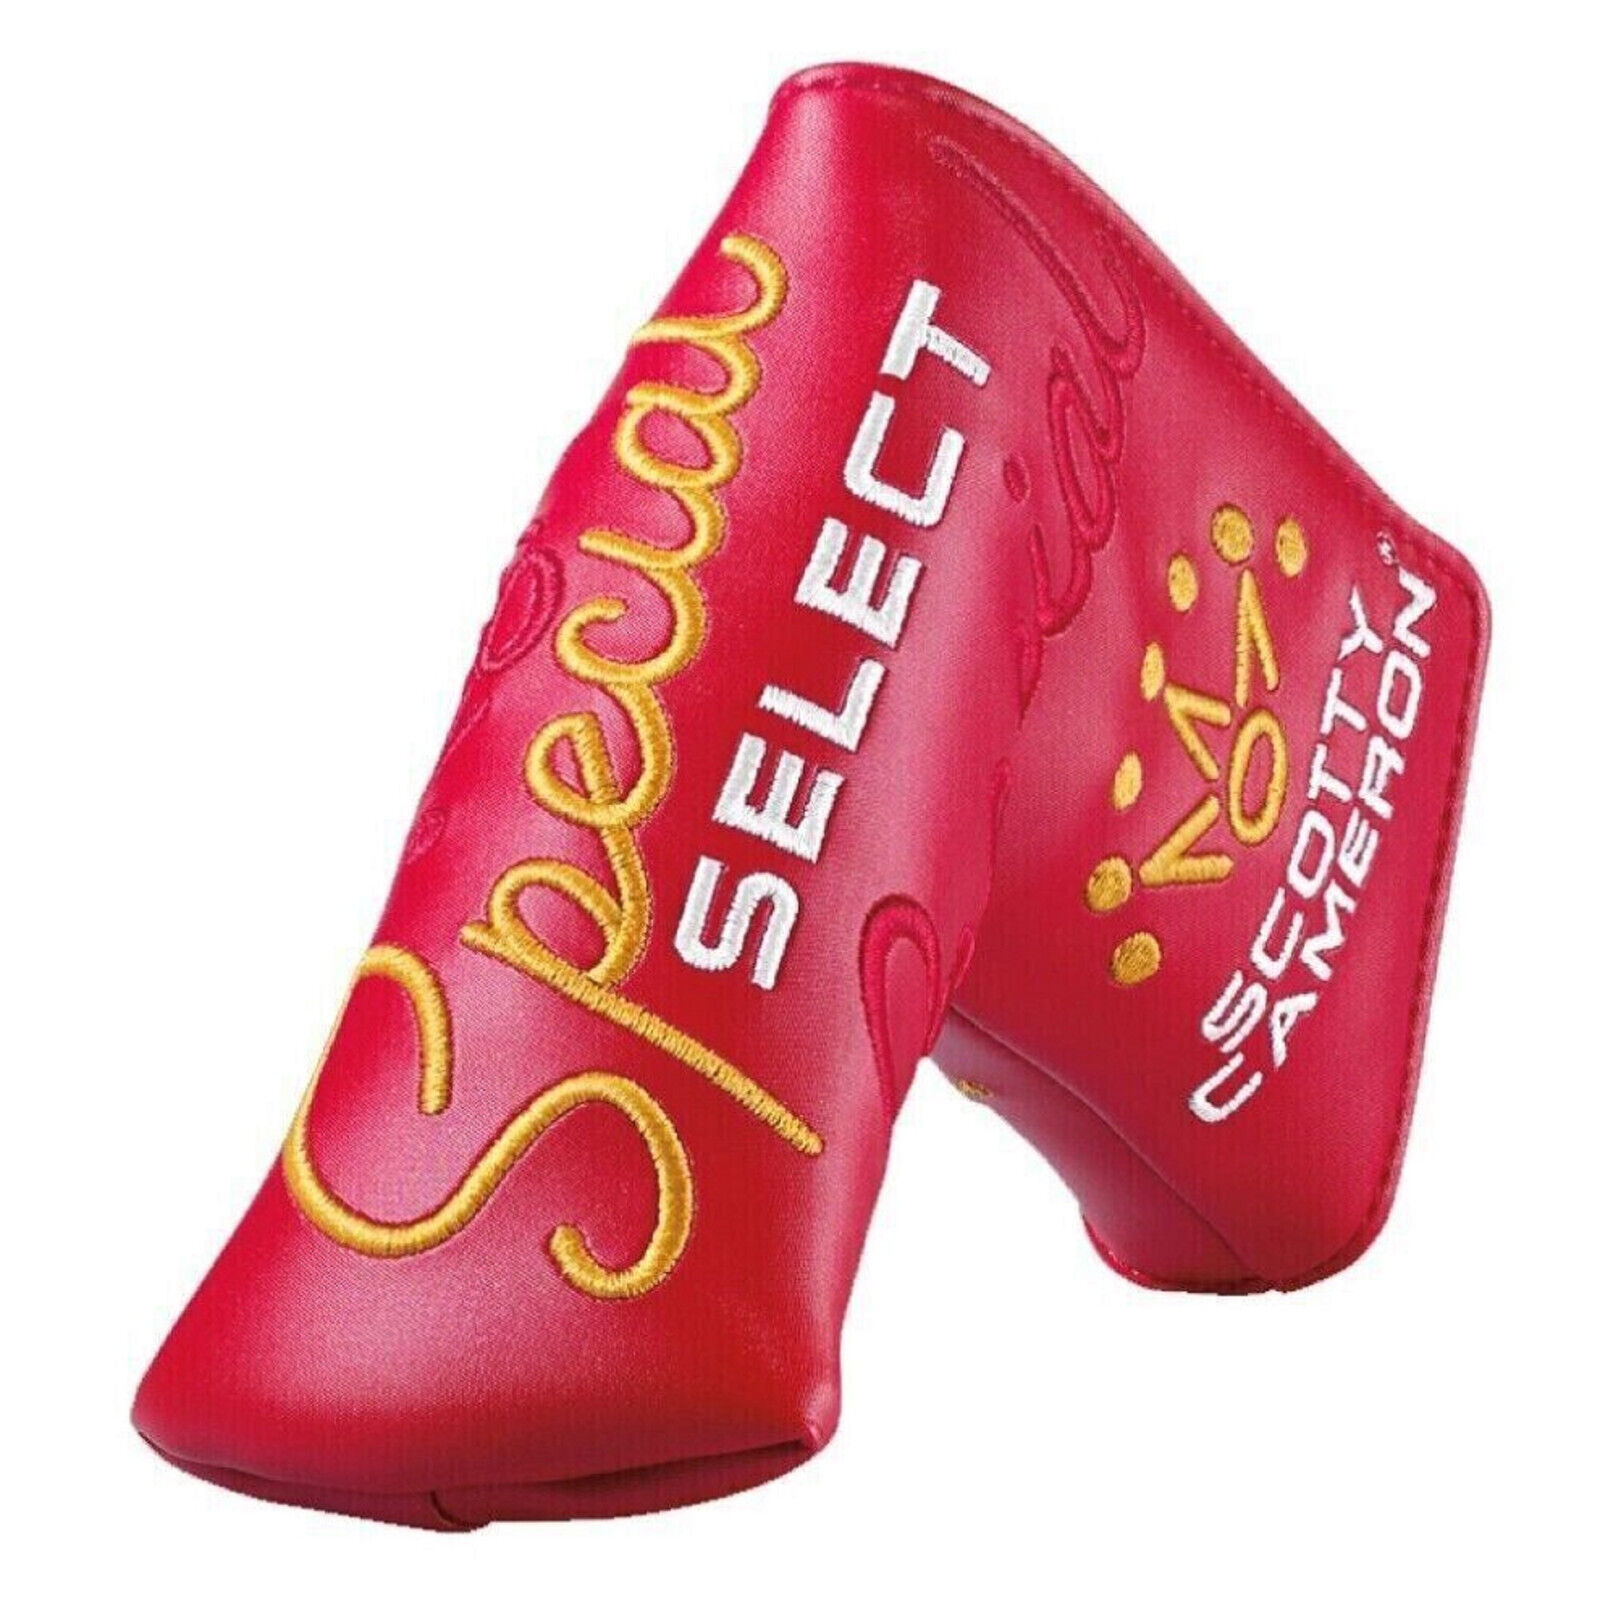 SCOTTY CAMERON SPECIAL SELECT NEWPORT BLADE PUTTER HEADCOVER COVER - NEW